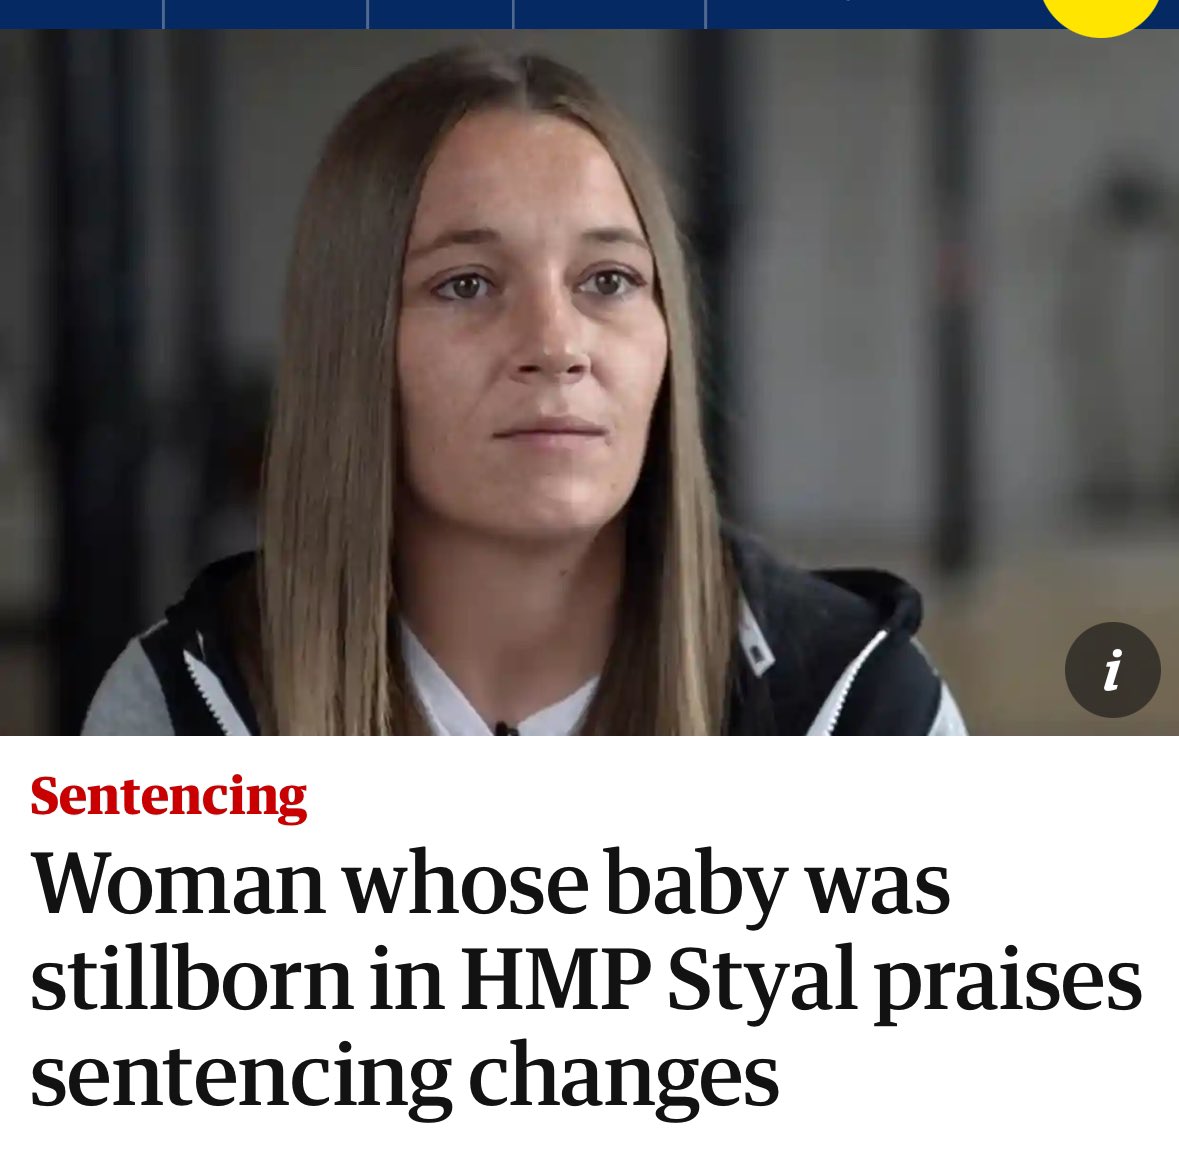 Louise Powell, whose baby Brooke died in prison, is glad that the court system is changing for pregnant women: “If my daughter Brooke had been born in the community, she would be here today. No woman should have to give birth behind bars.” amp.theguardian.com/law/2024/mar/1…